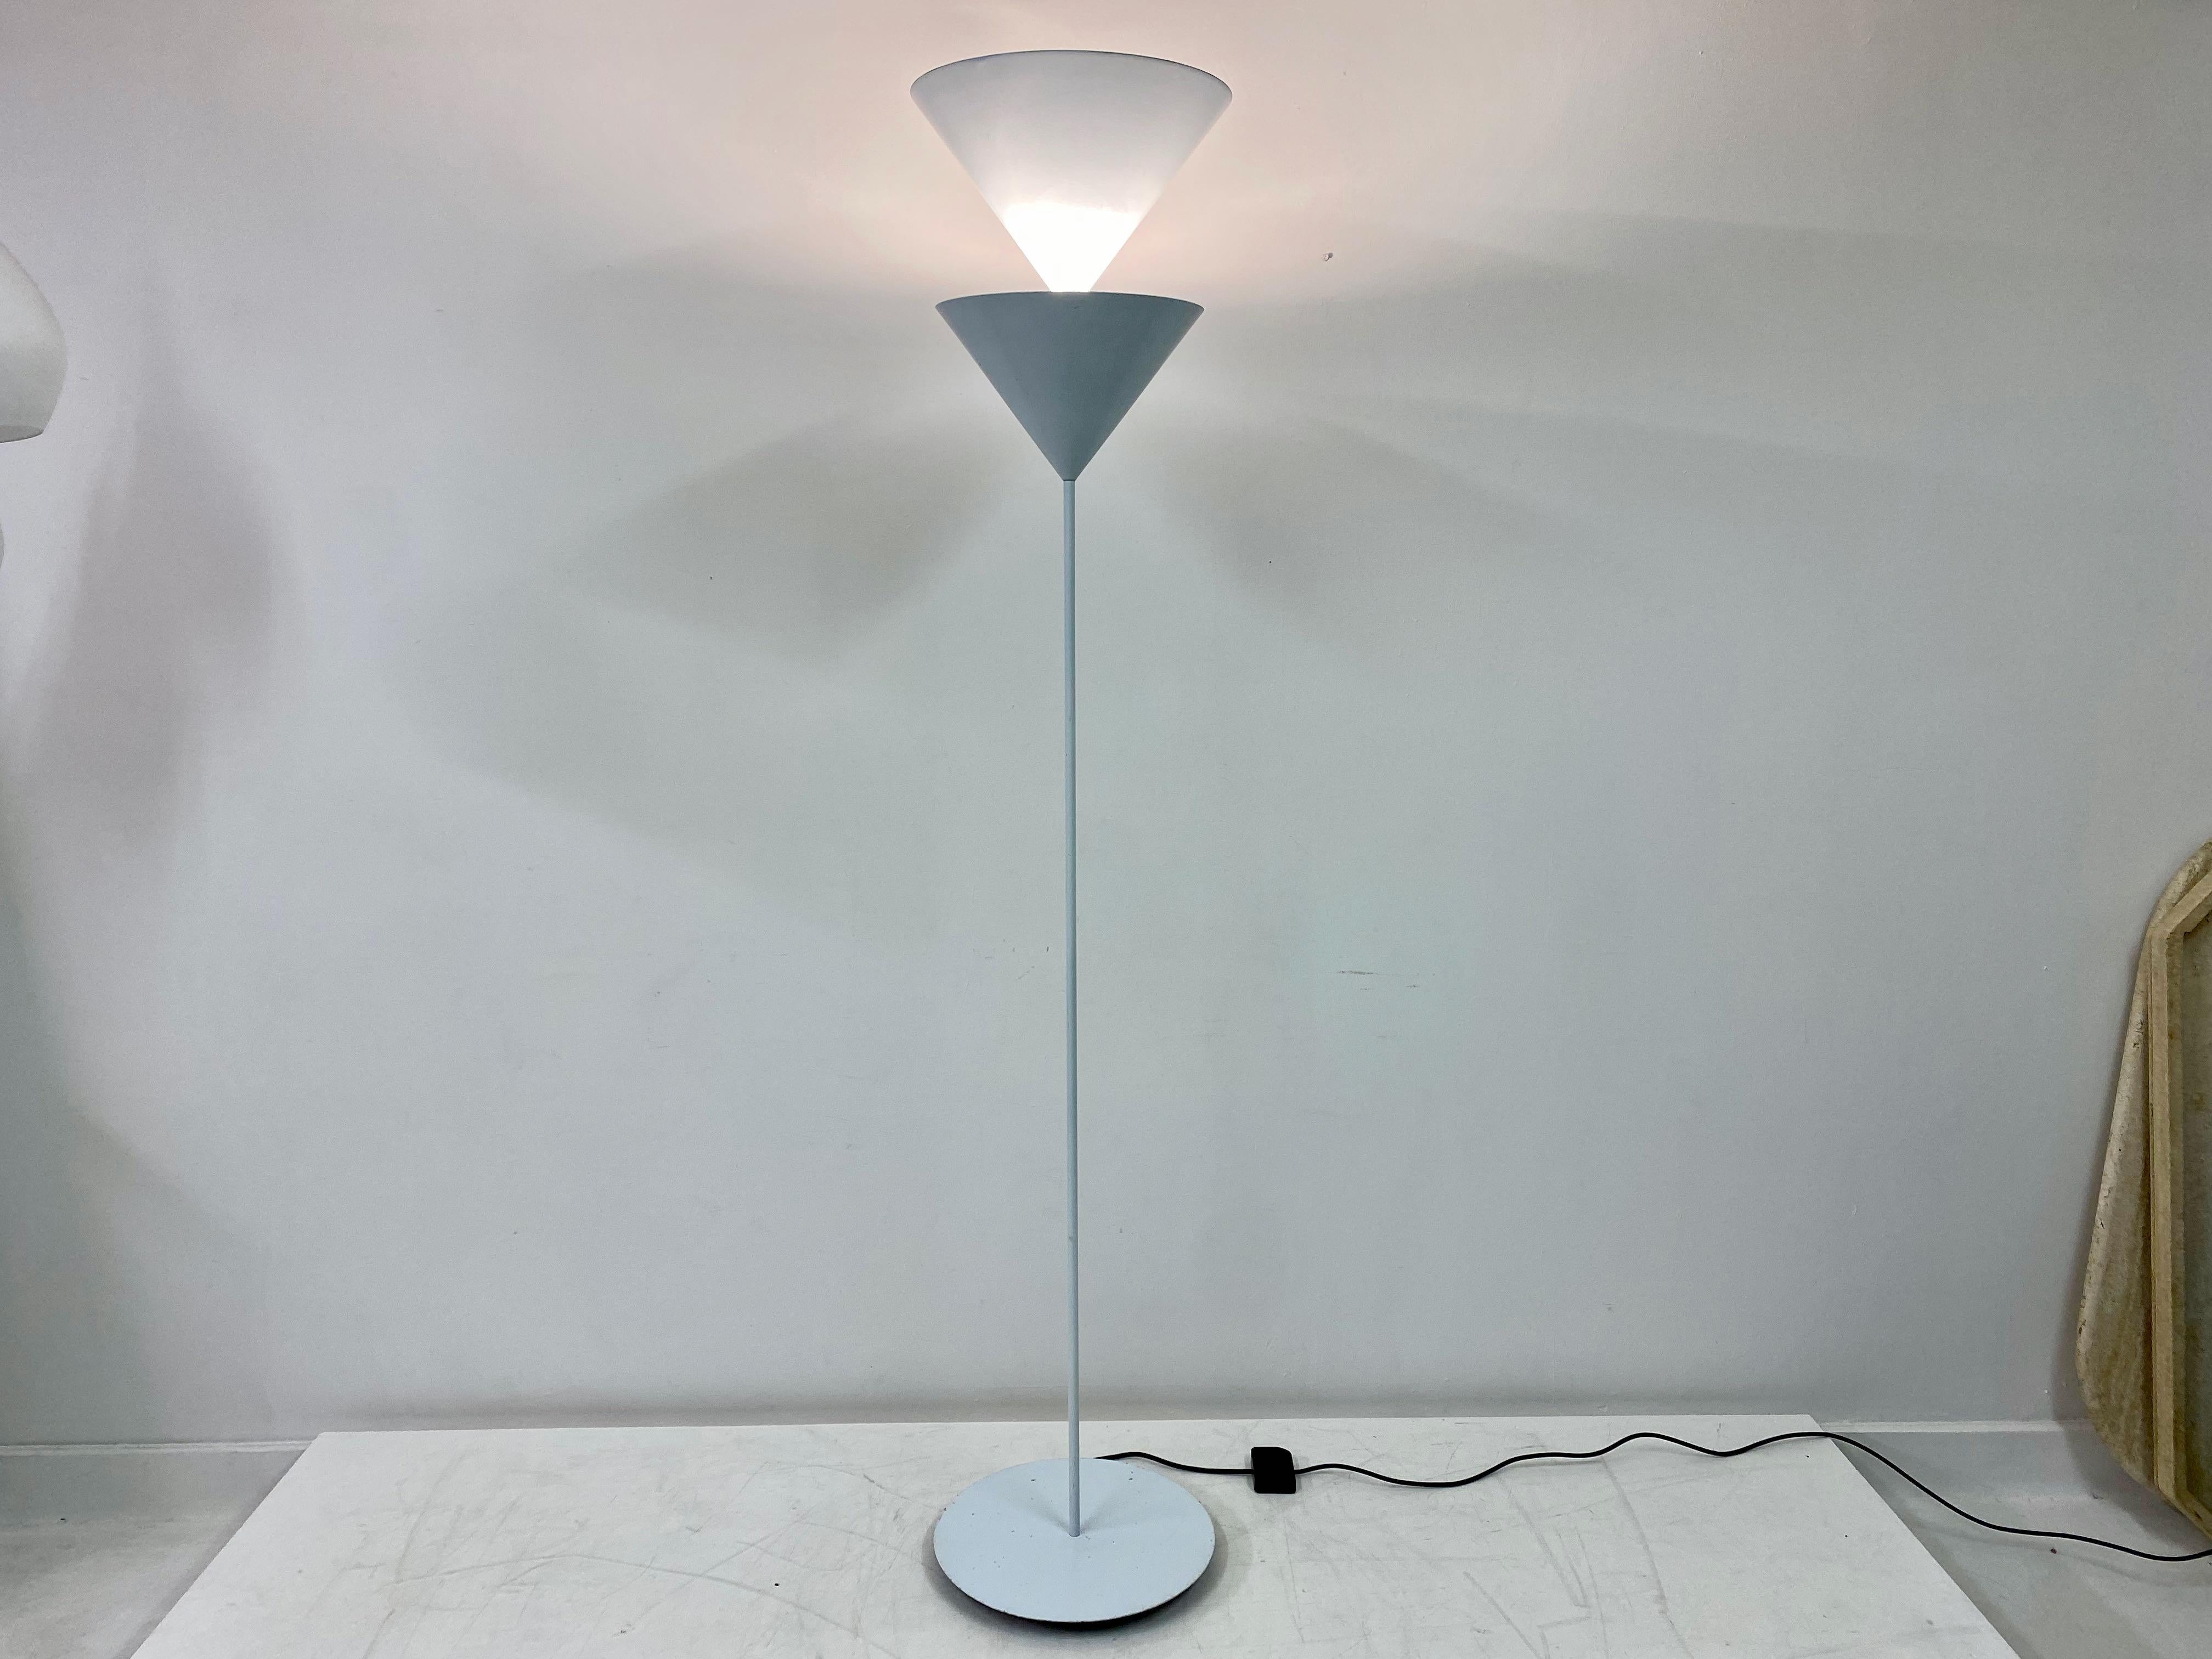 Aluminum 1980s Pascal Floor Lamp by Vico Magistretti for Oluce